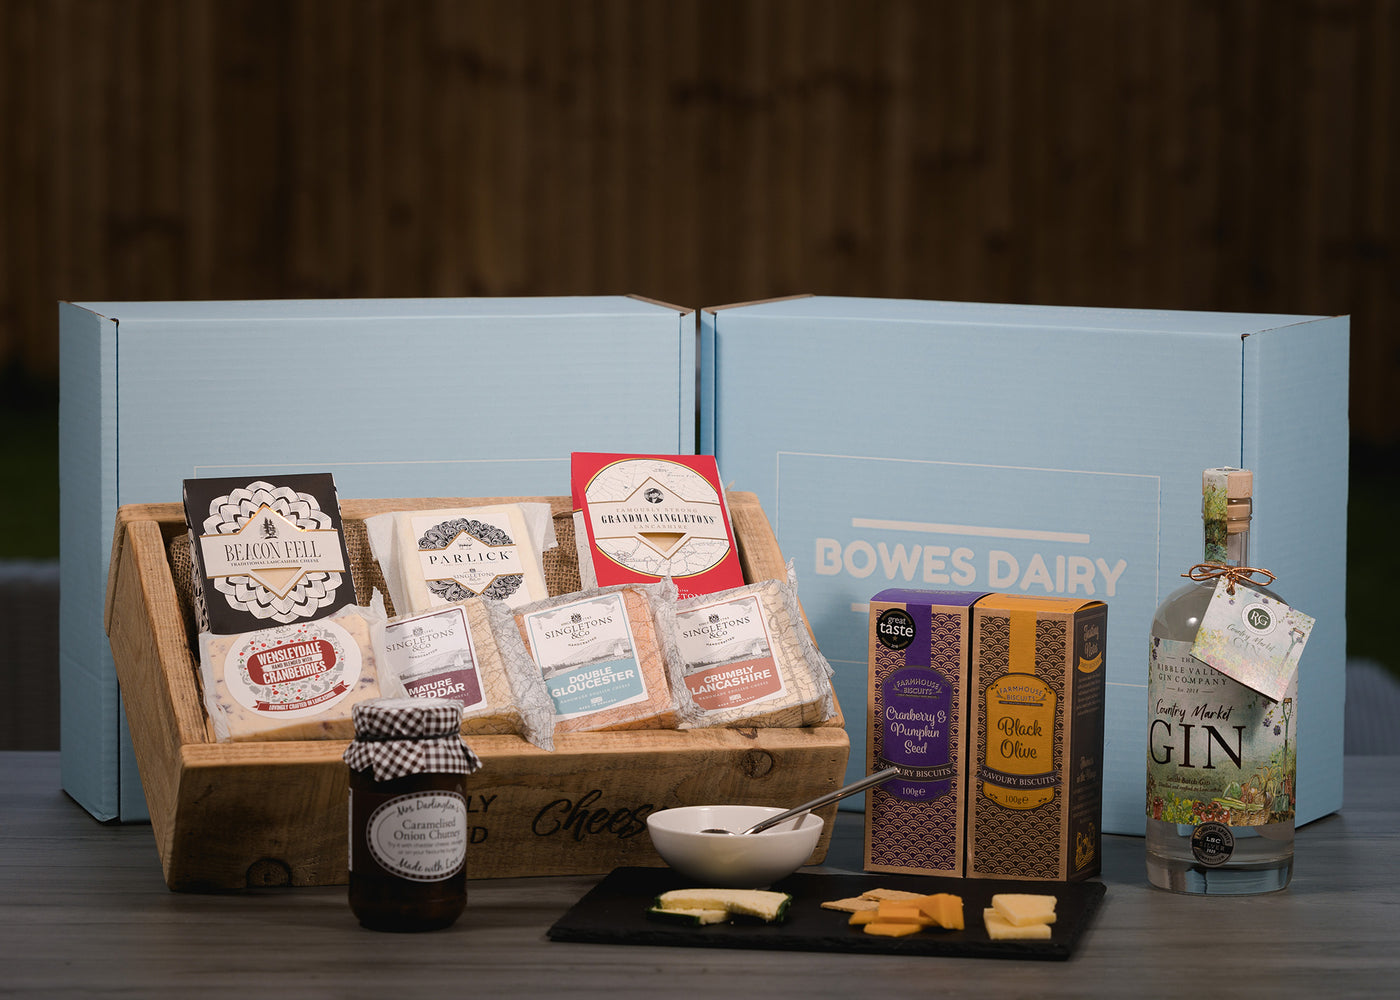 The Lancy Cheese Box Hamper with Gin, Vodka or Limoncello